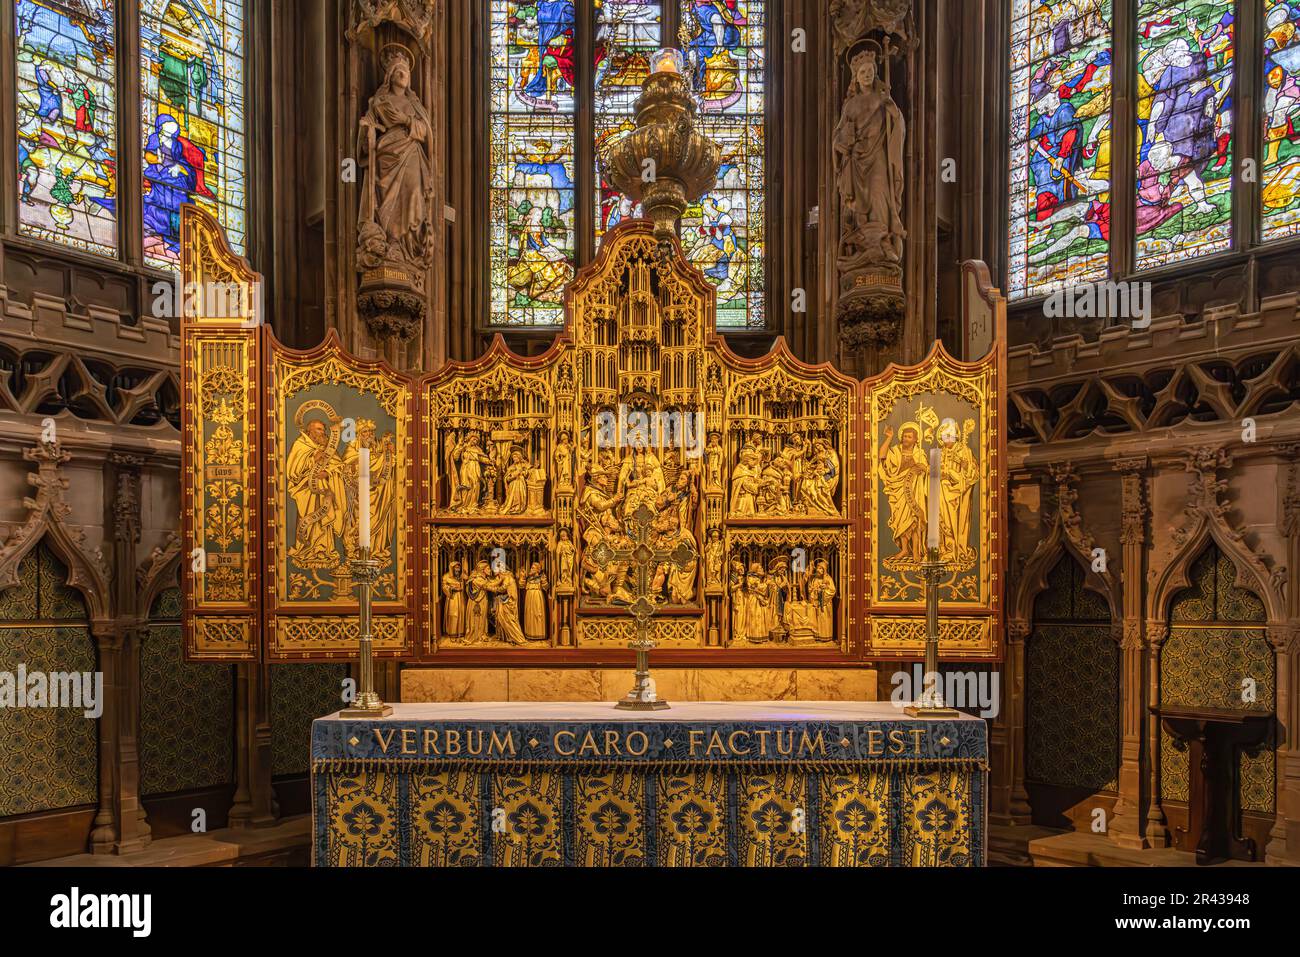 Detail of the golden altar within the Lady Chapel of Lichfield Cathedral. Interior of Lichfield cathedral with altar and stained glass windows. Stock Photo